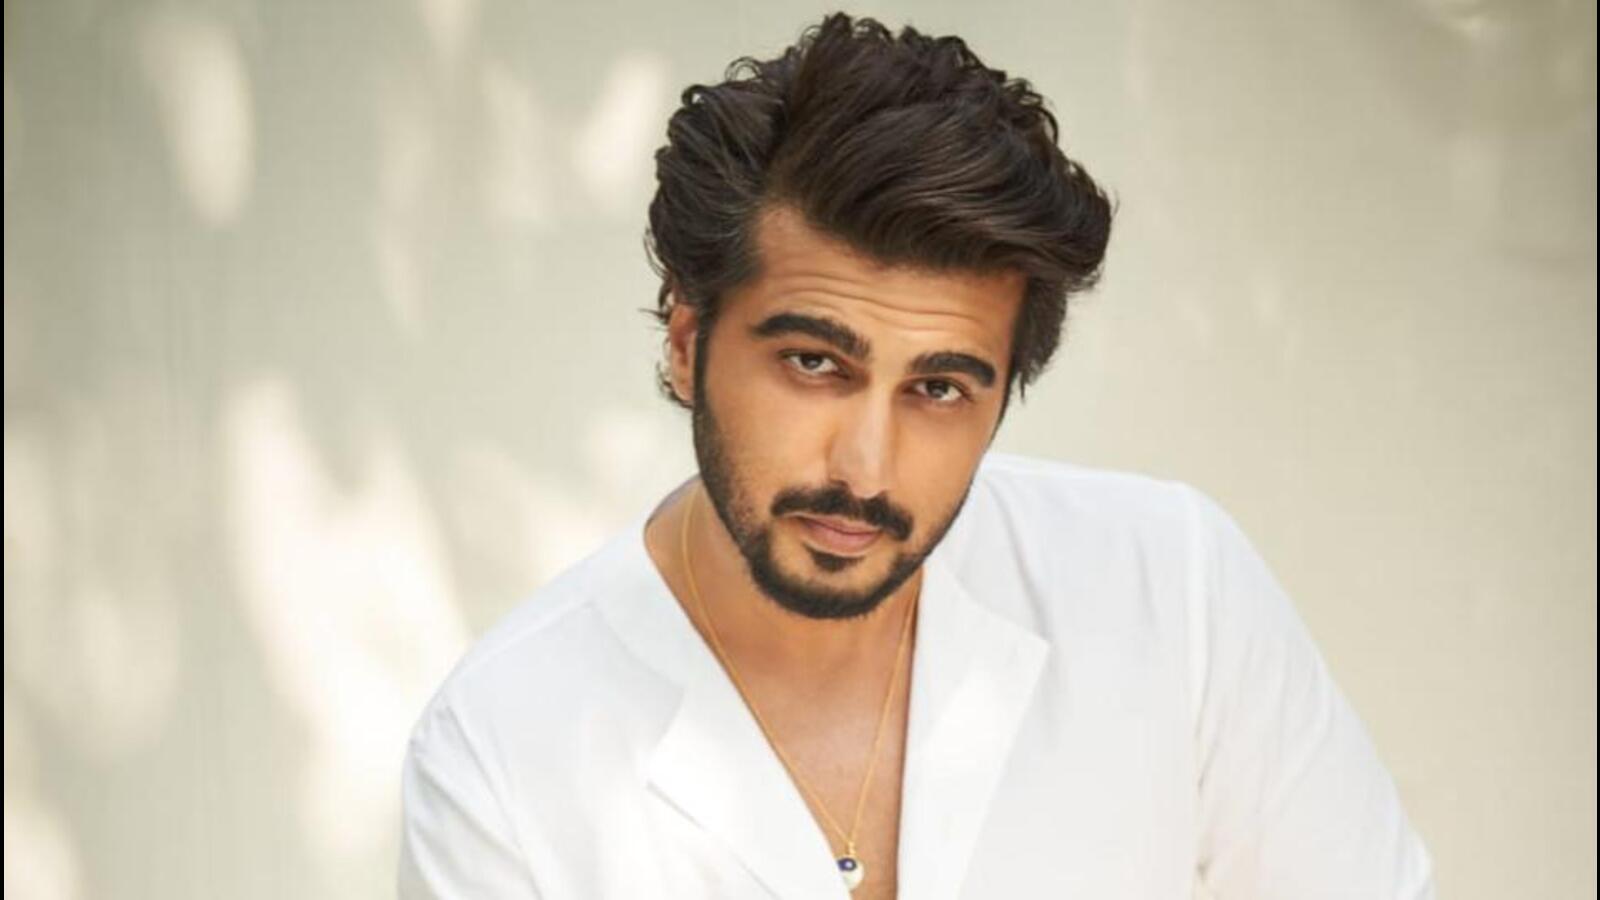 Arjun Kapoor Hairstyle: Cool and Handsome Look